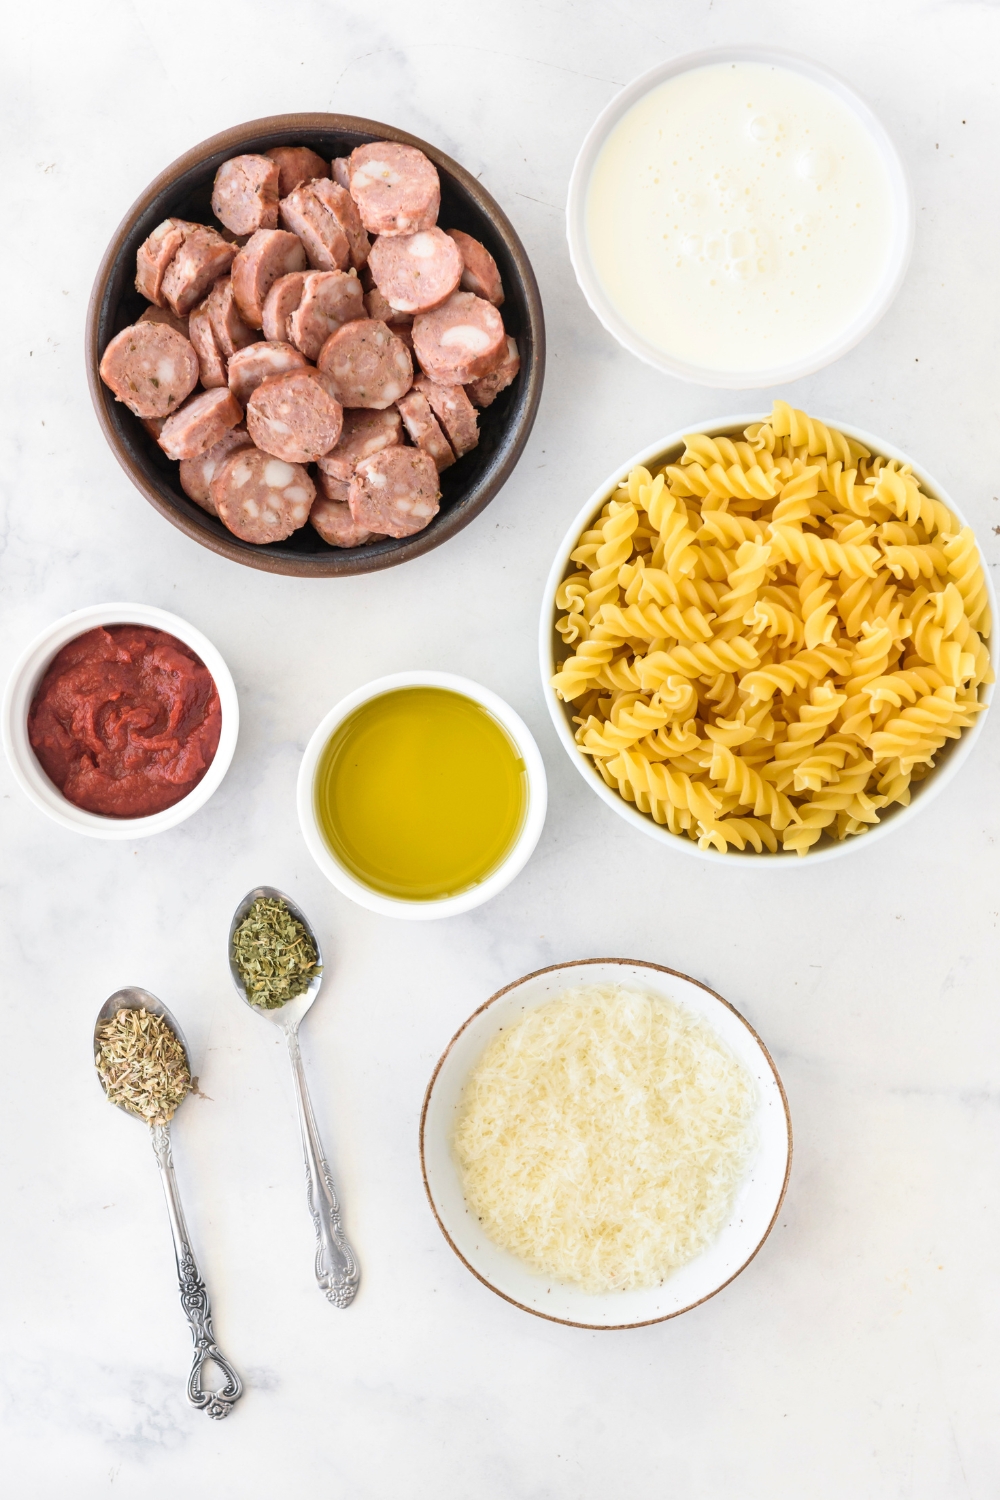 An assortment of ingredients including bowls of sausage slices, dried pasta, tomato paste, cream, cheese, oil, and two spoons full of dried herbs.